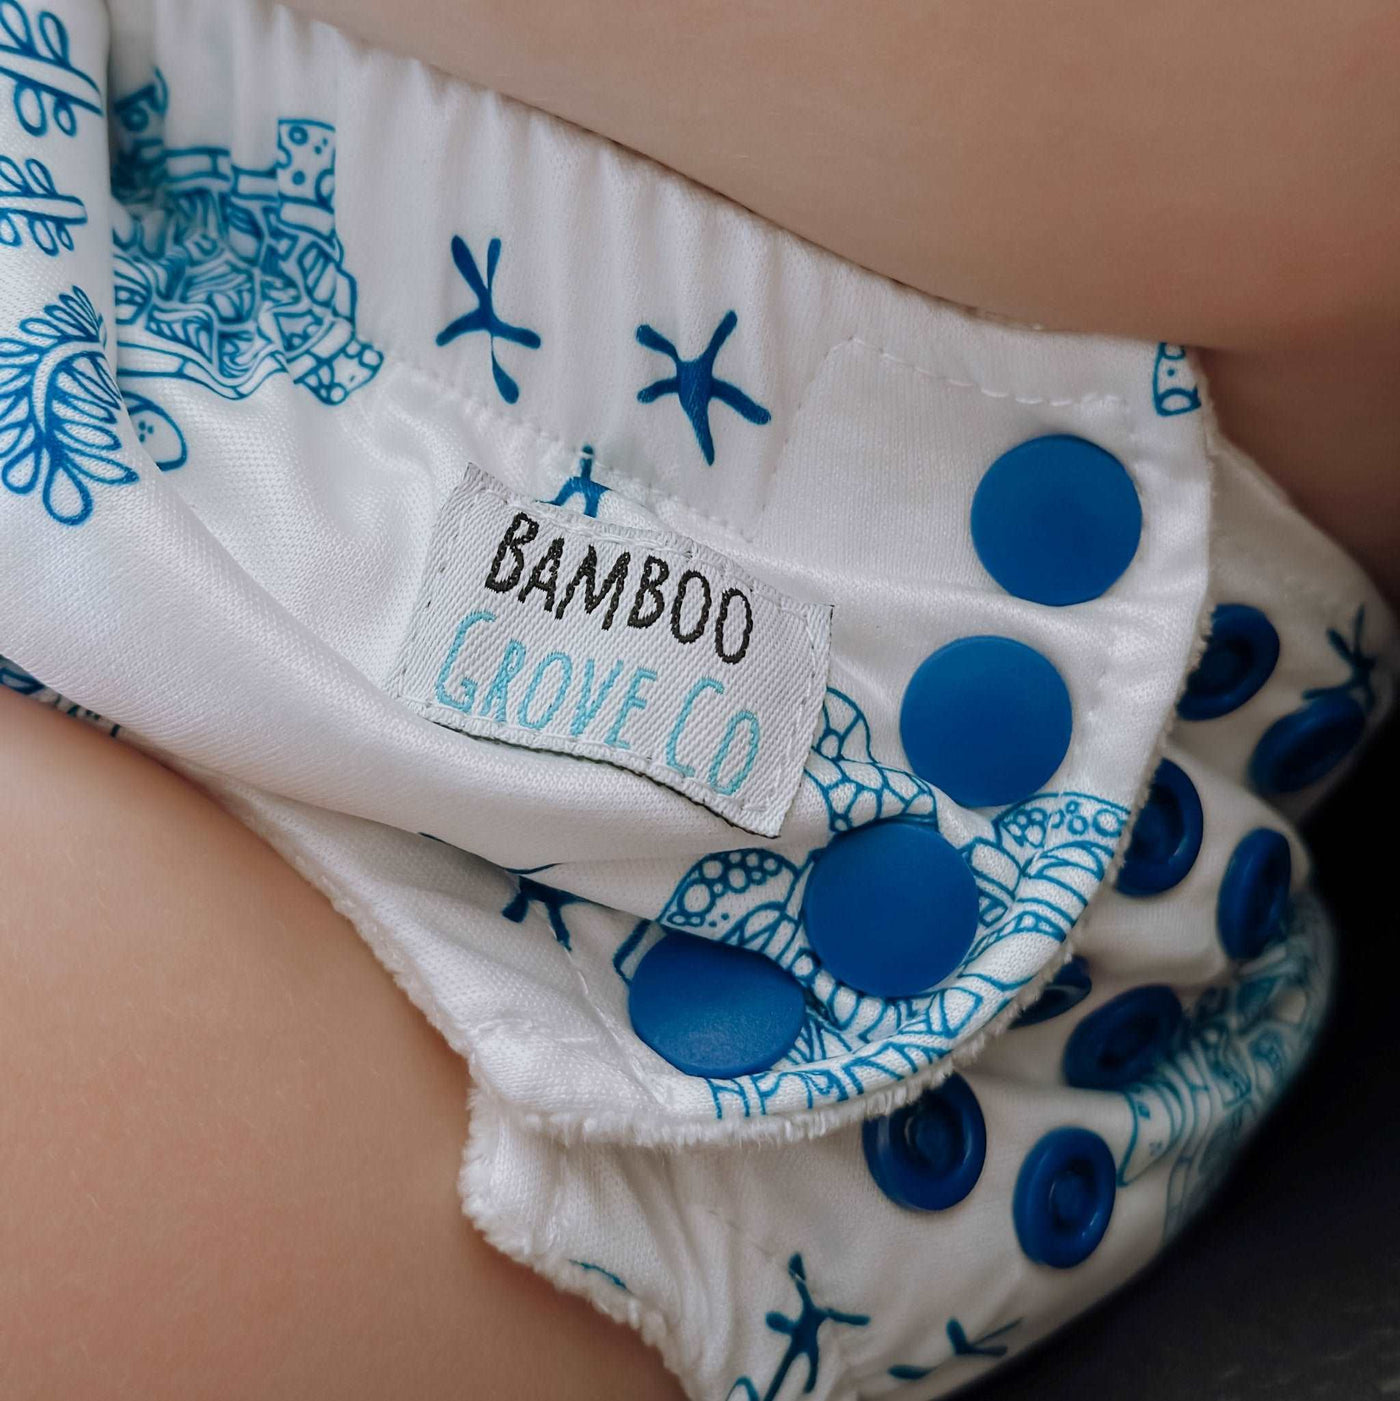 Reusable Toilet training pants for toddlers